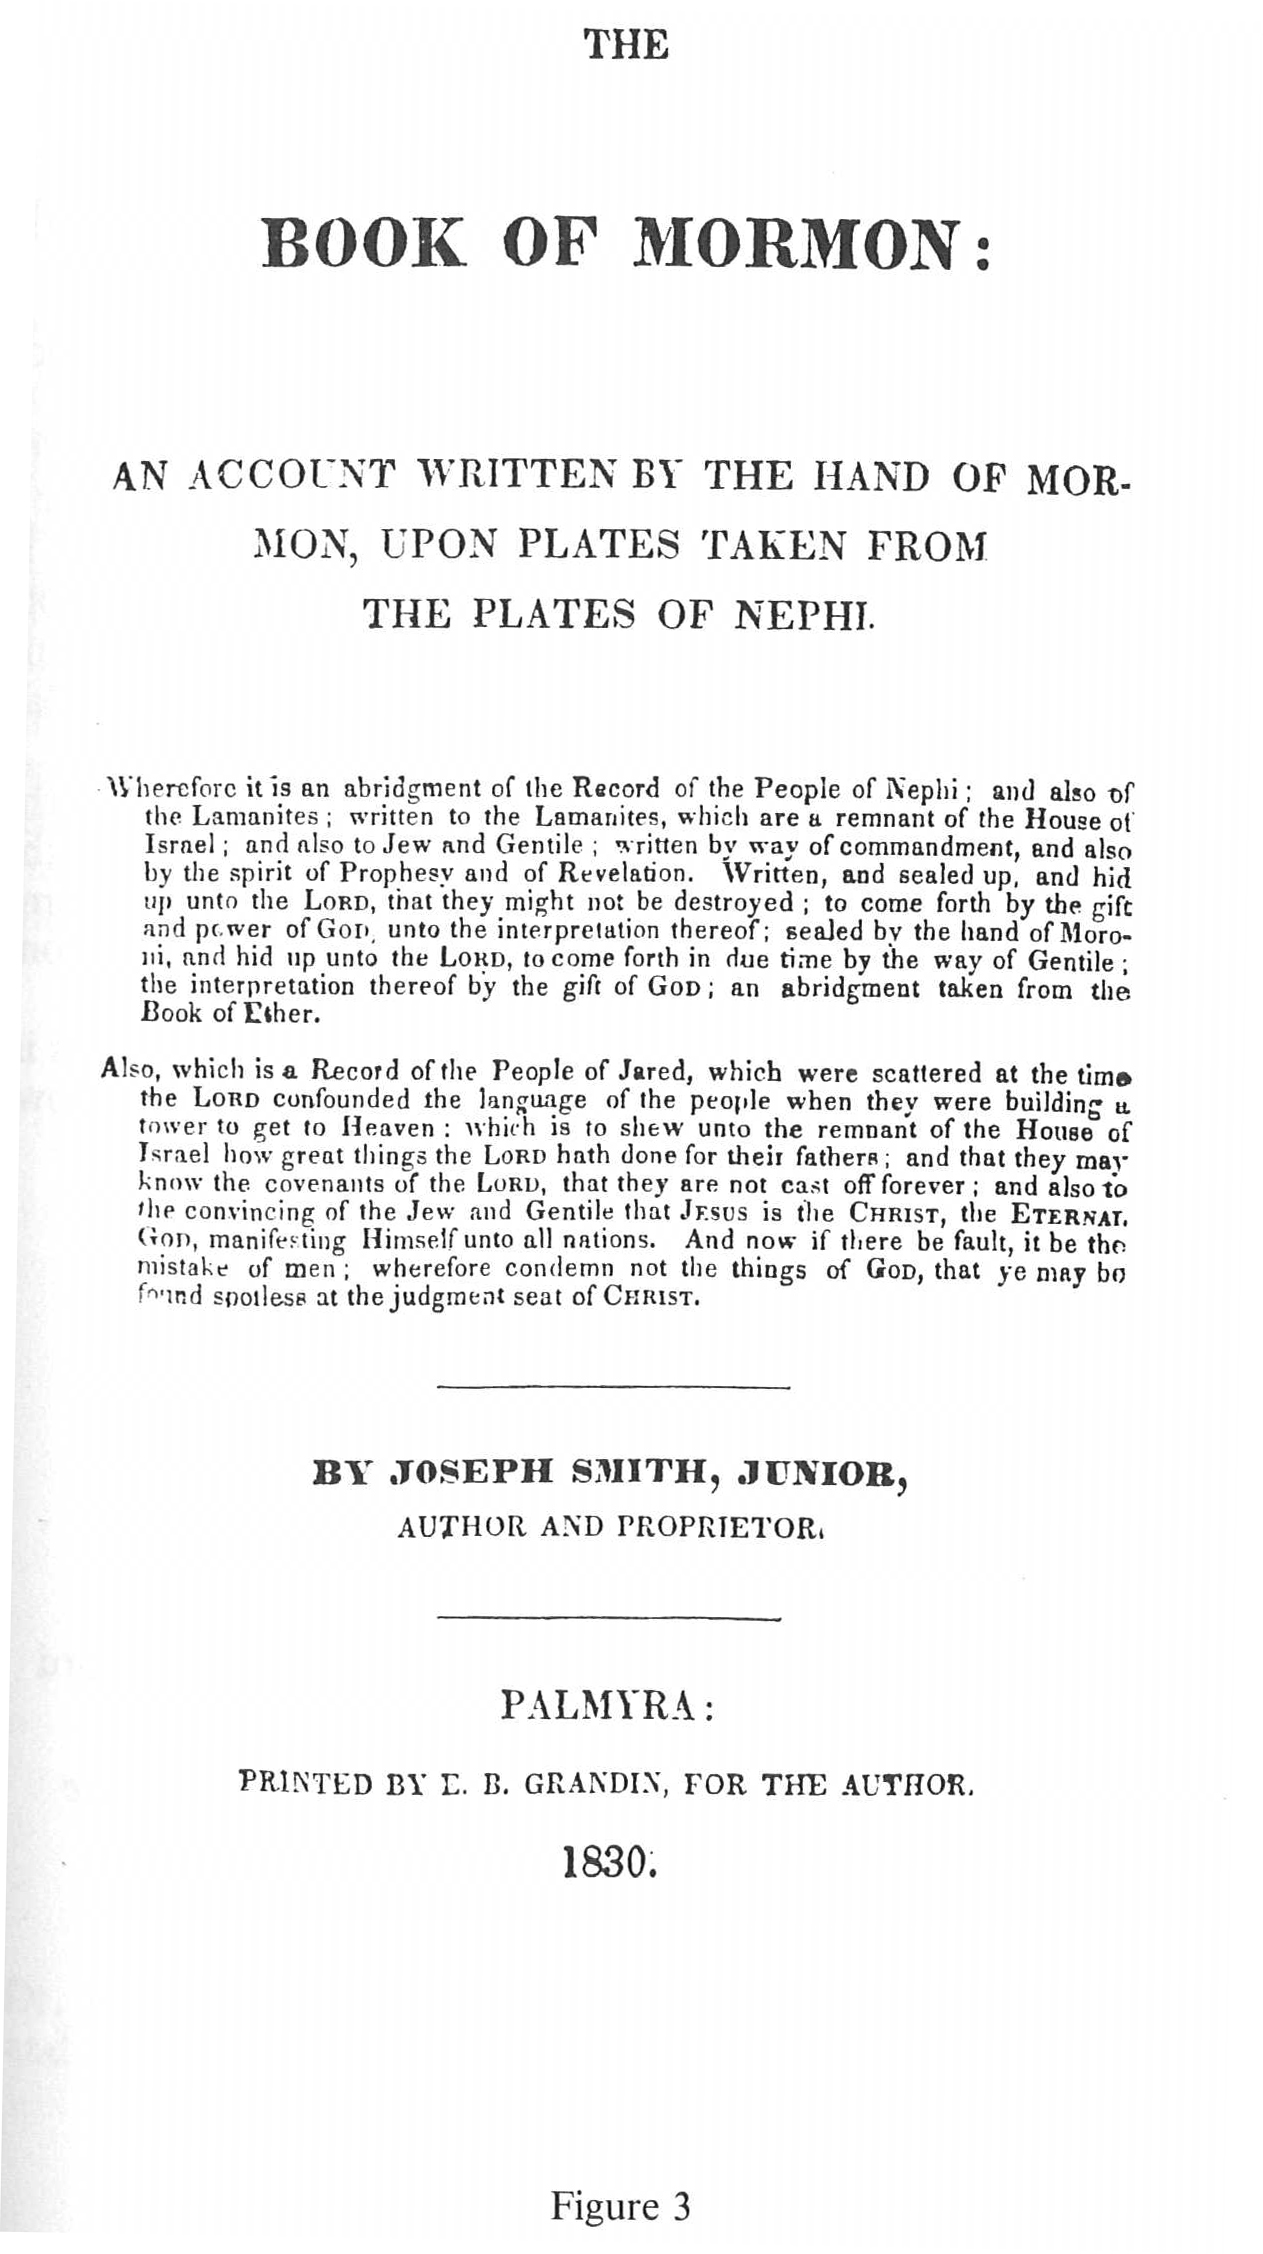 Book of Mormon title page